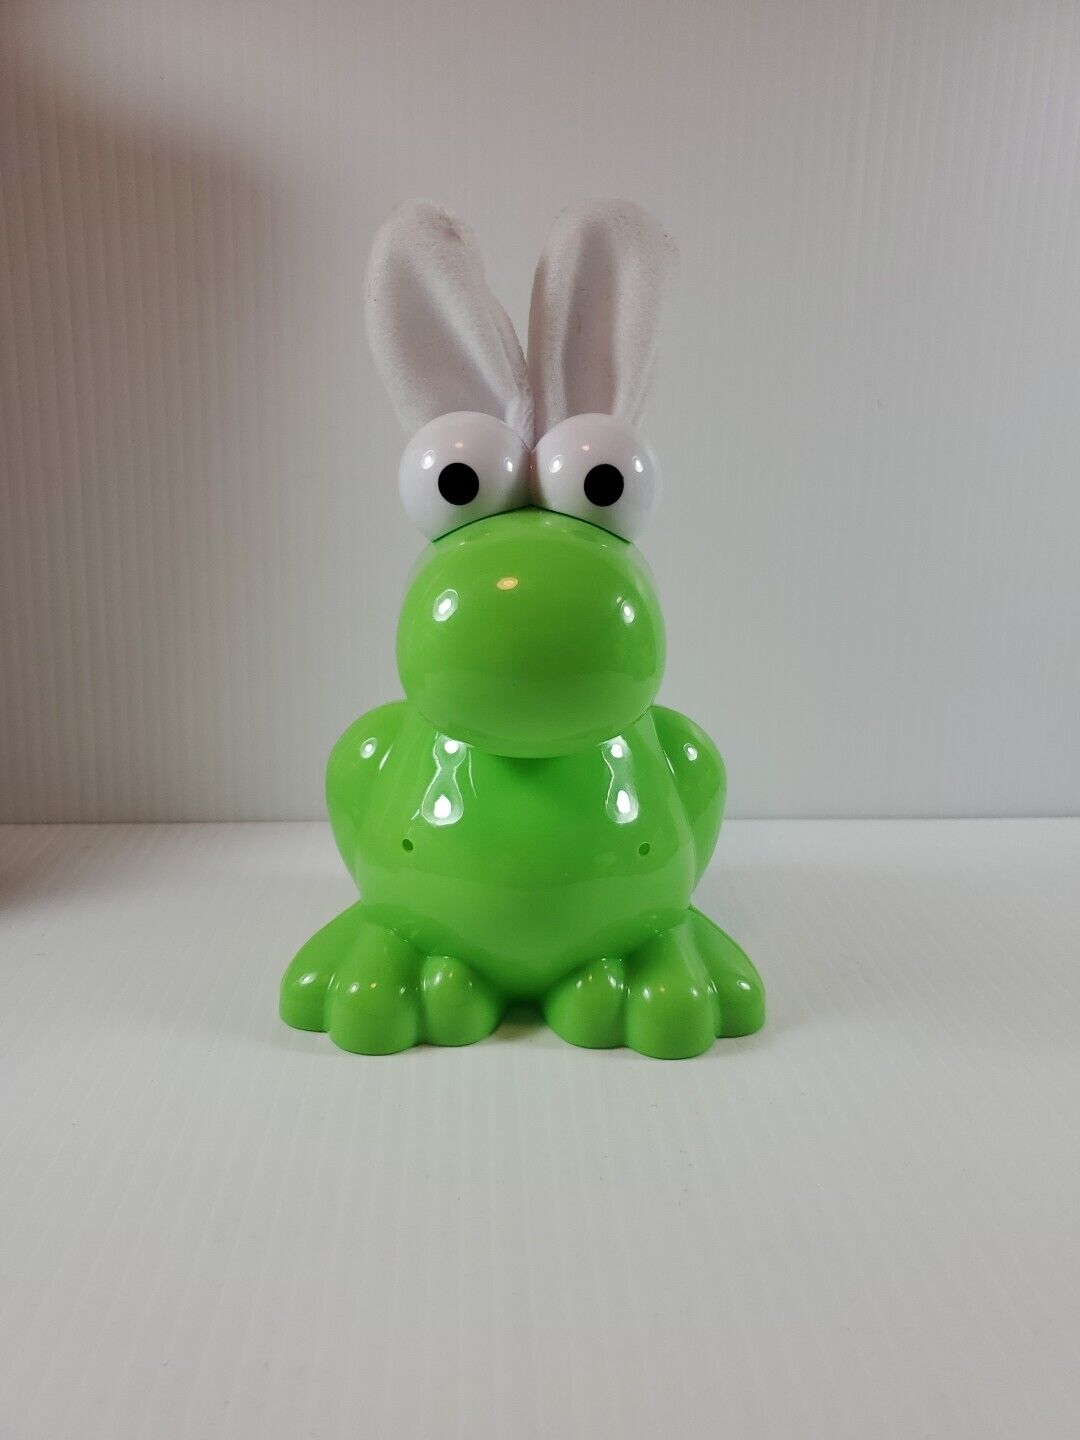 BIG CHEWY NERDS CANDY EASTER HOLIDAY PLASTIC CONTAINER BUNNY EARS GREEN